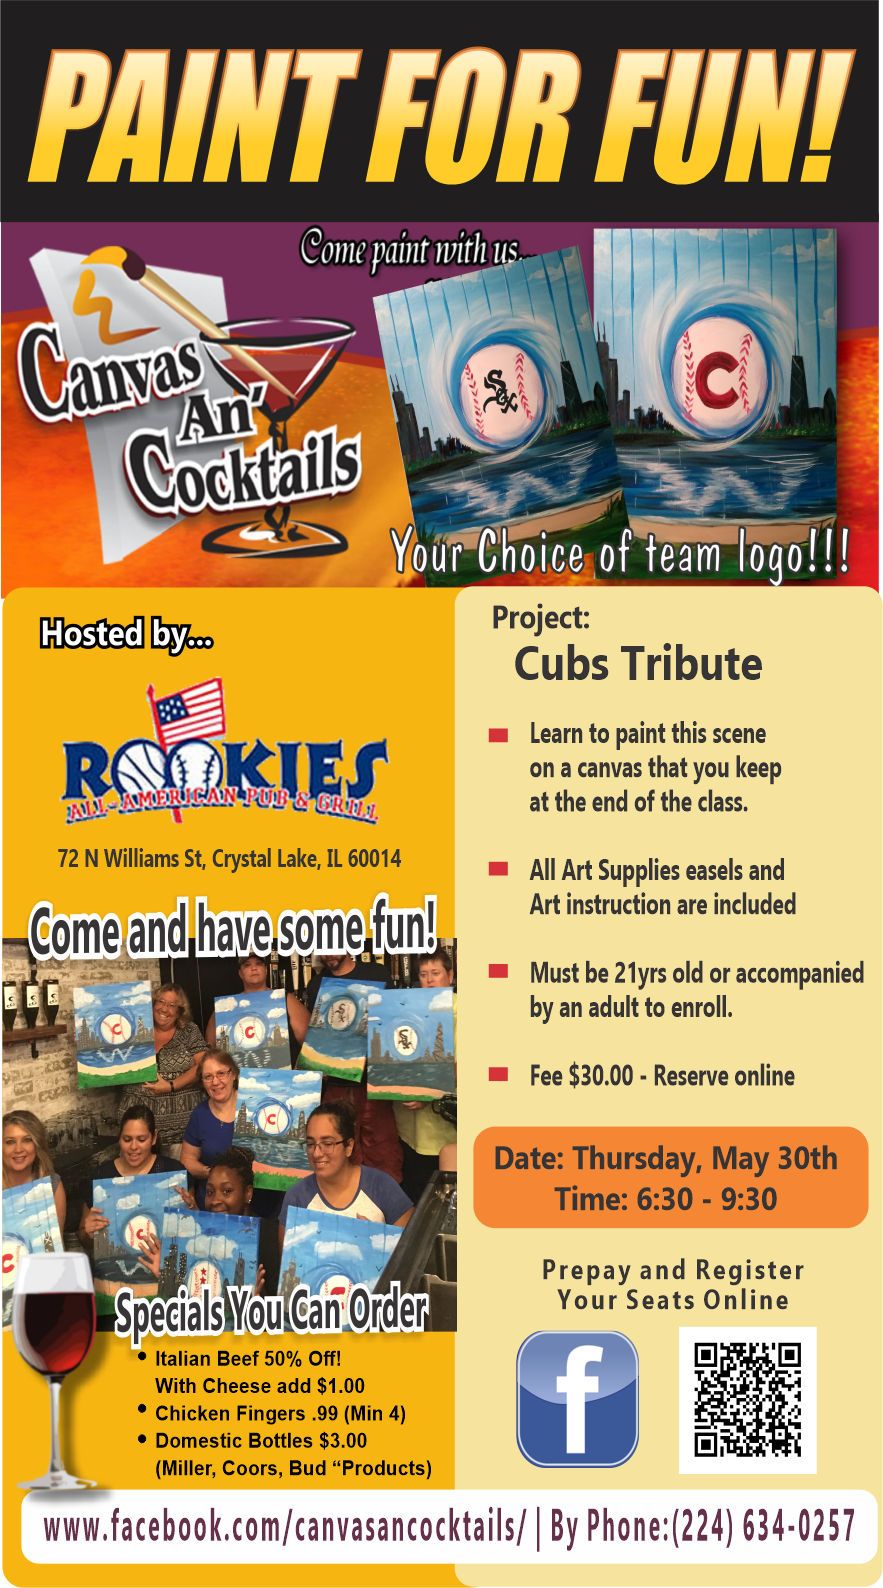 Baseball Tribute Sip & Paint event with Canvas An' Cocktails at Rookies